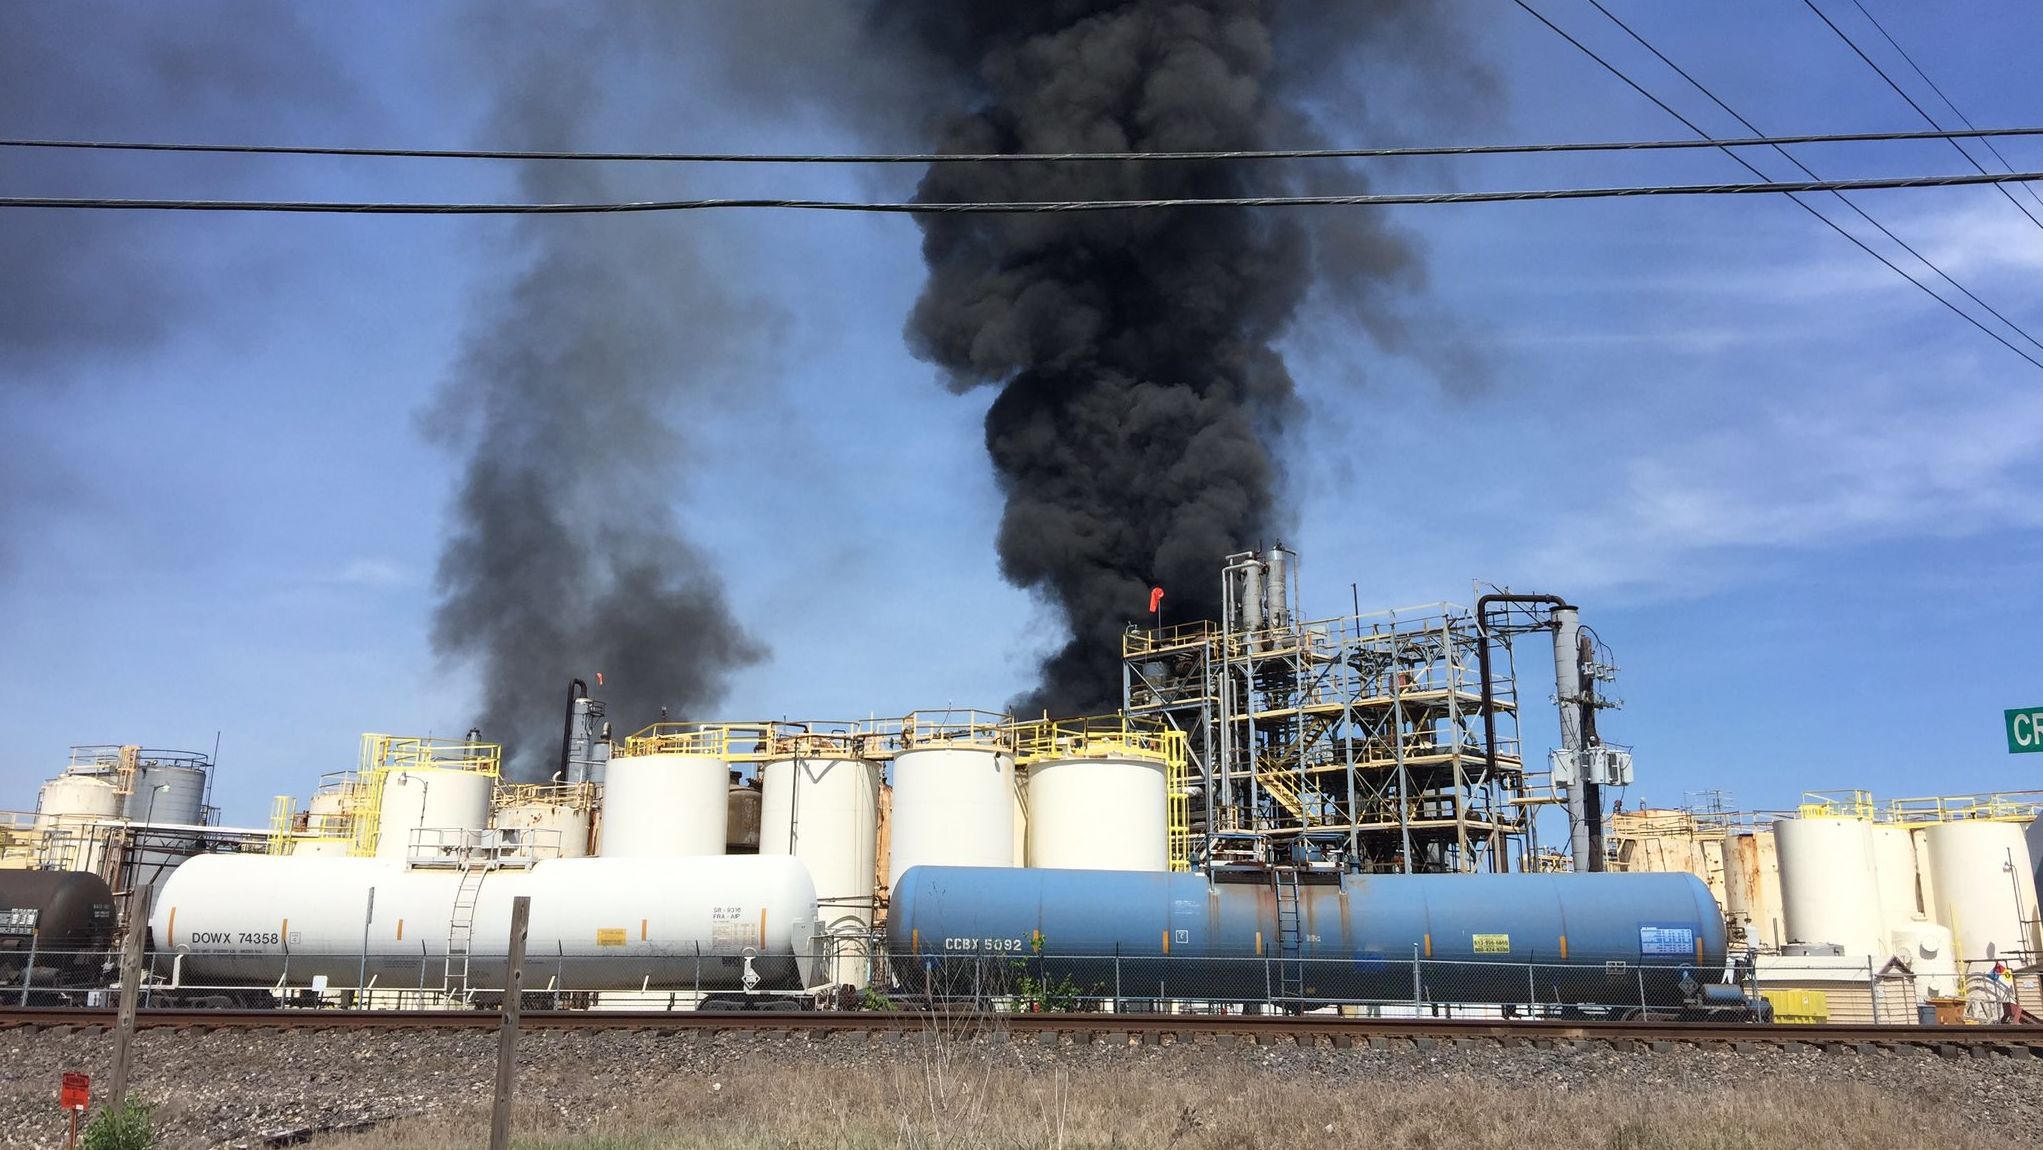 Investigators are trying to determine what caused Tuesday's fire at a KMCO chemical plant.